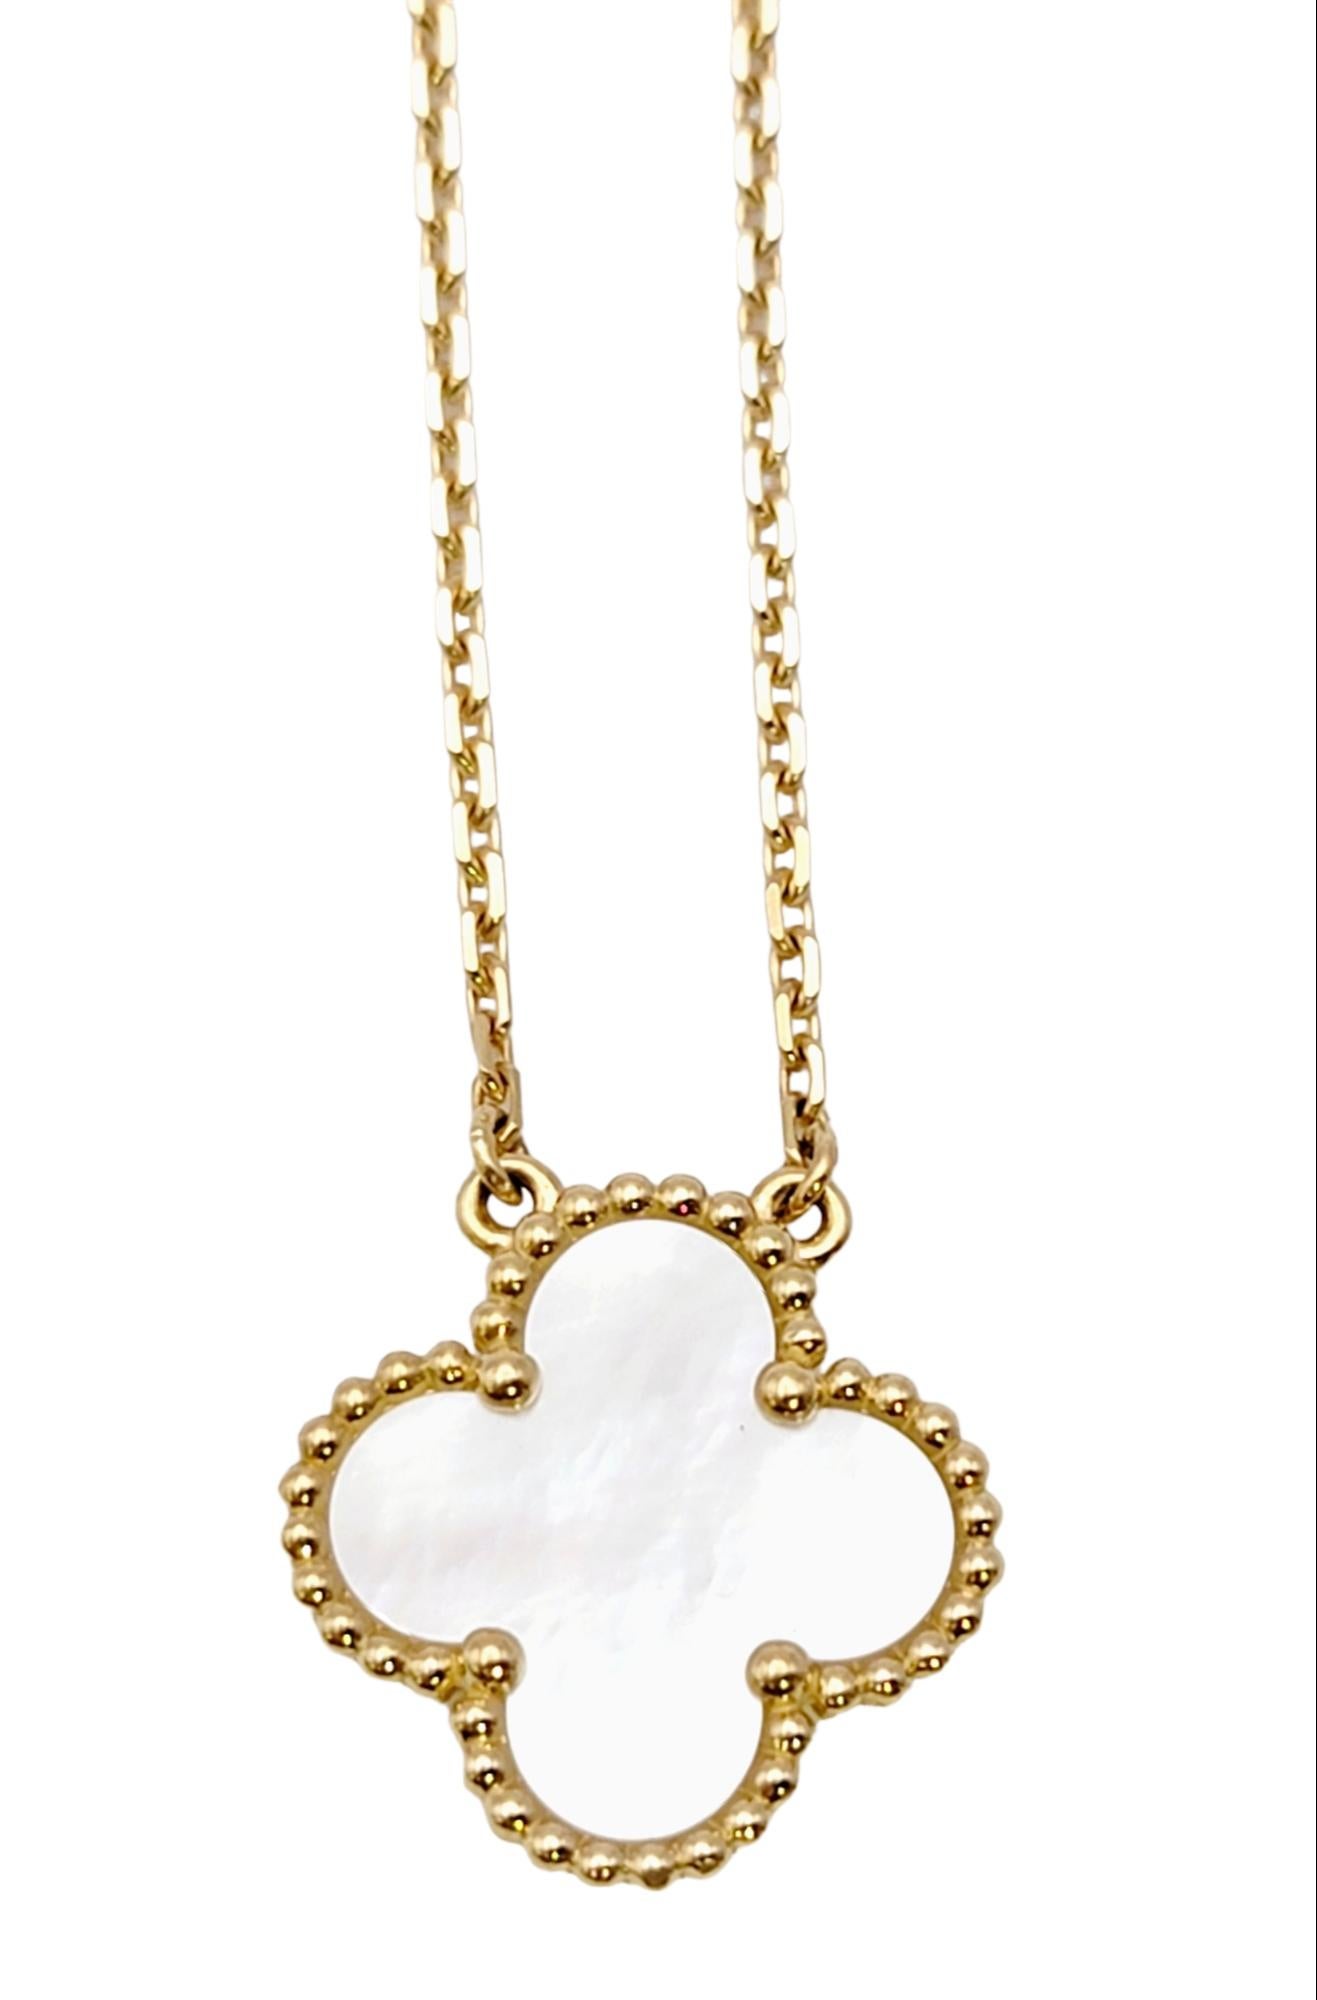 Discover the captivating allure of this Van Cleef & Arpels Vintage Alhambra Pendant Necklace. This timeless piece embodies the grace and sophistication of the renowned jewelry house. Crafted with exceptional artistry, this exquisite pendant necklace